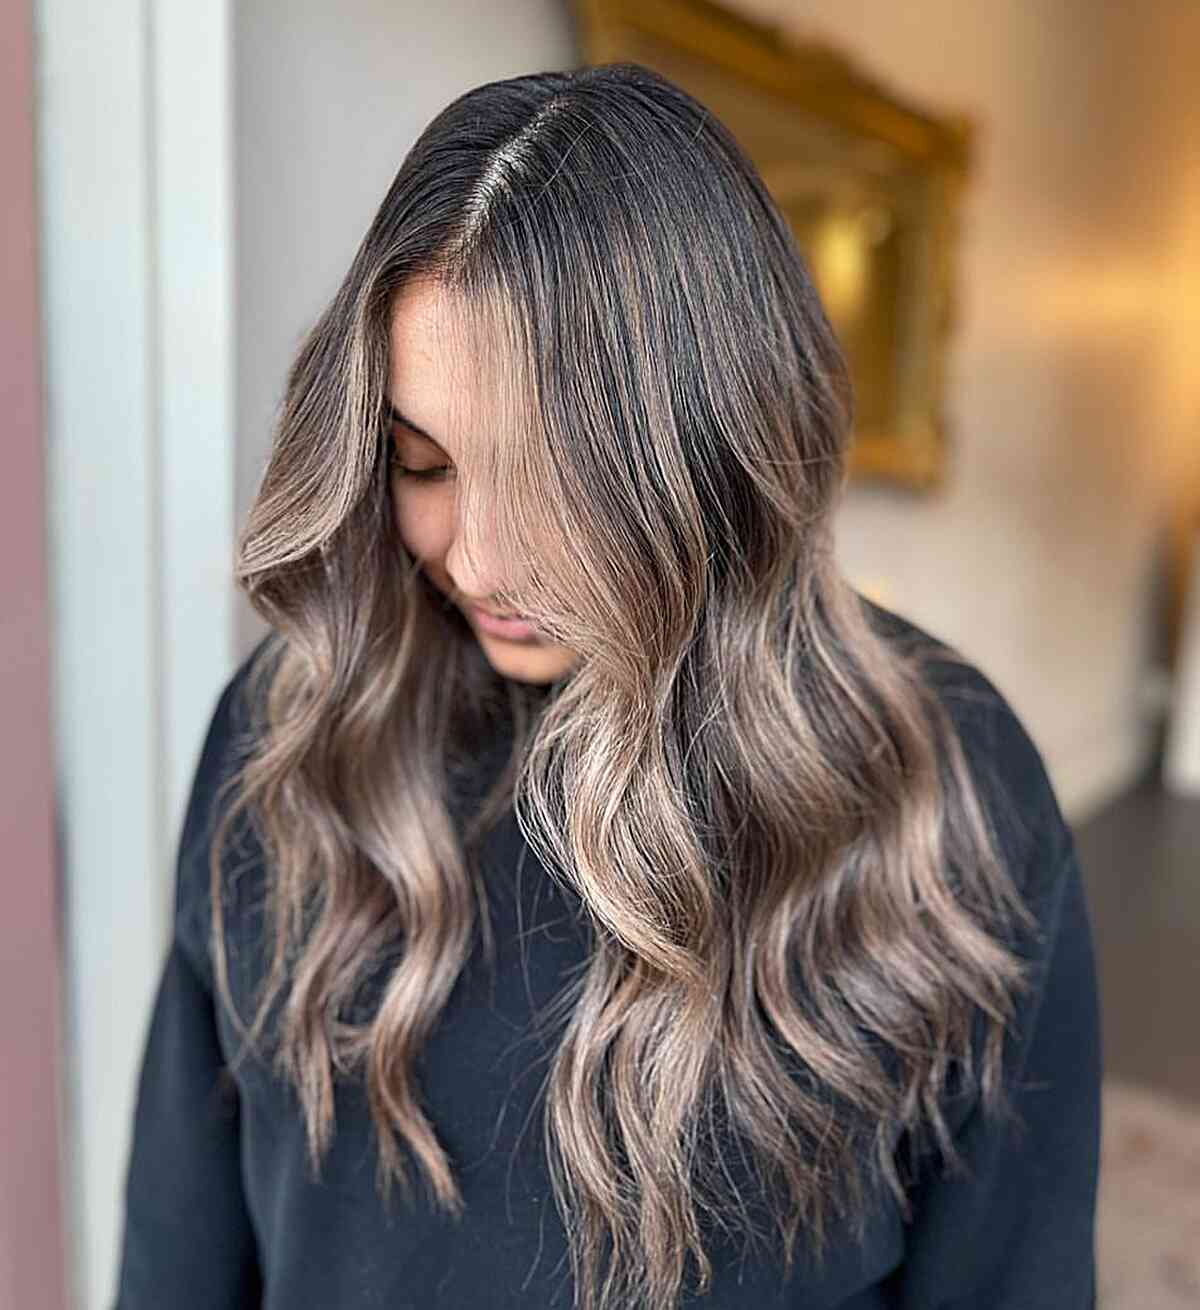 Middle-Parted Long Hair with Mushroom Brown Balayage Face-Framing Highlights